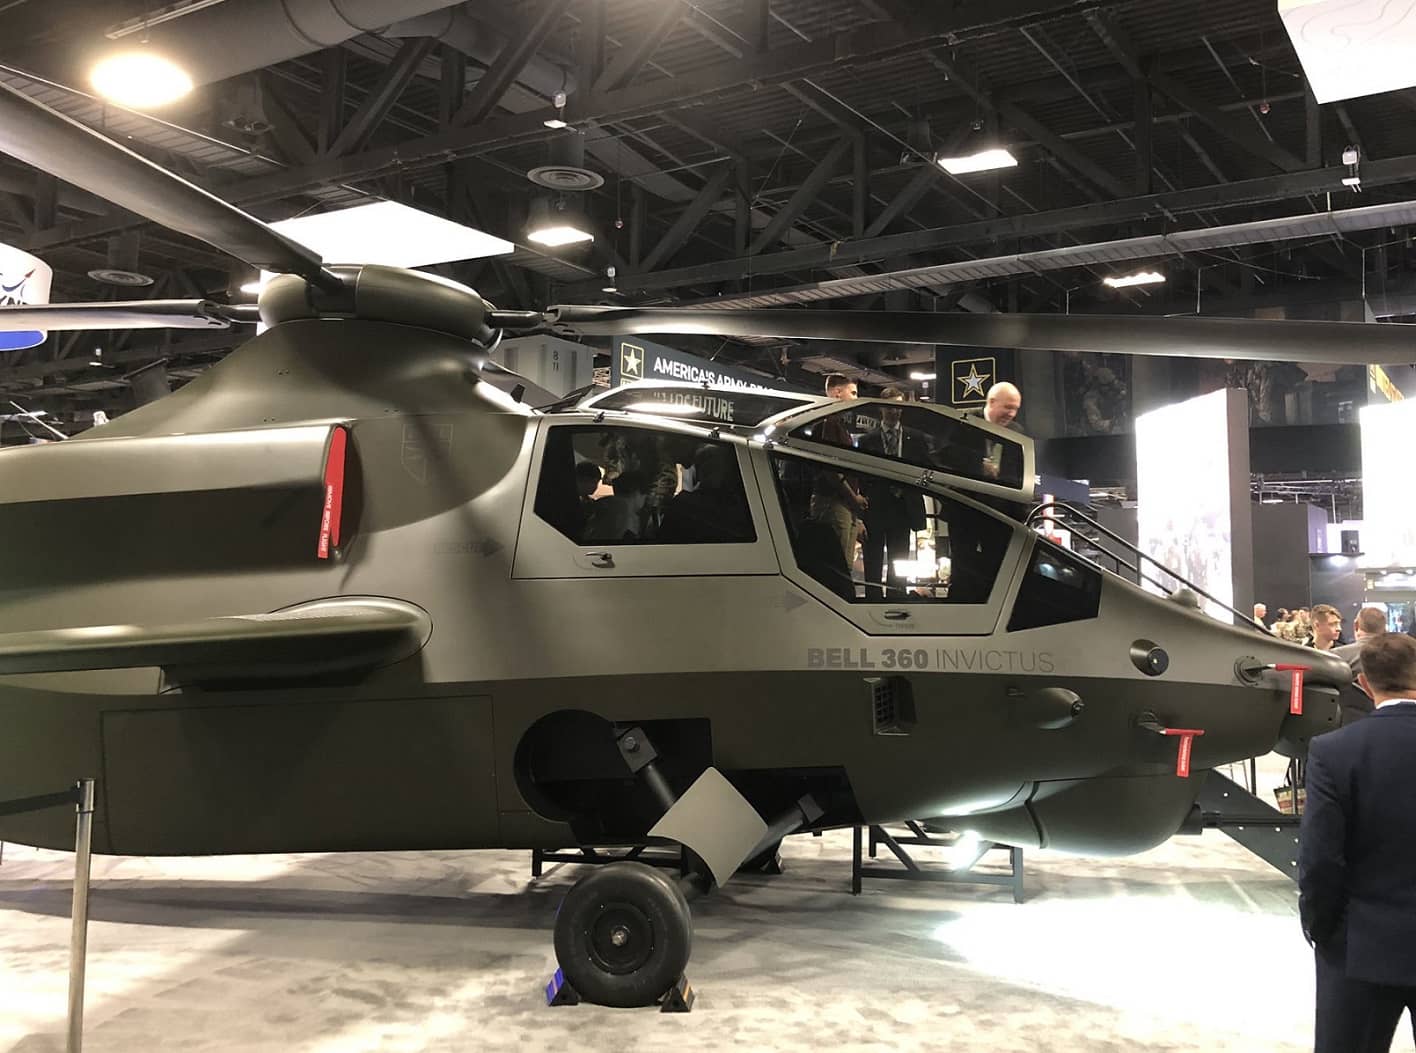 Bell 360 Invictus helicopter makes public debut